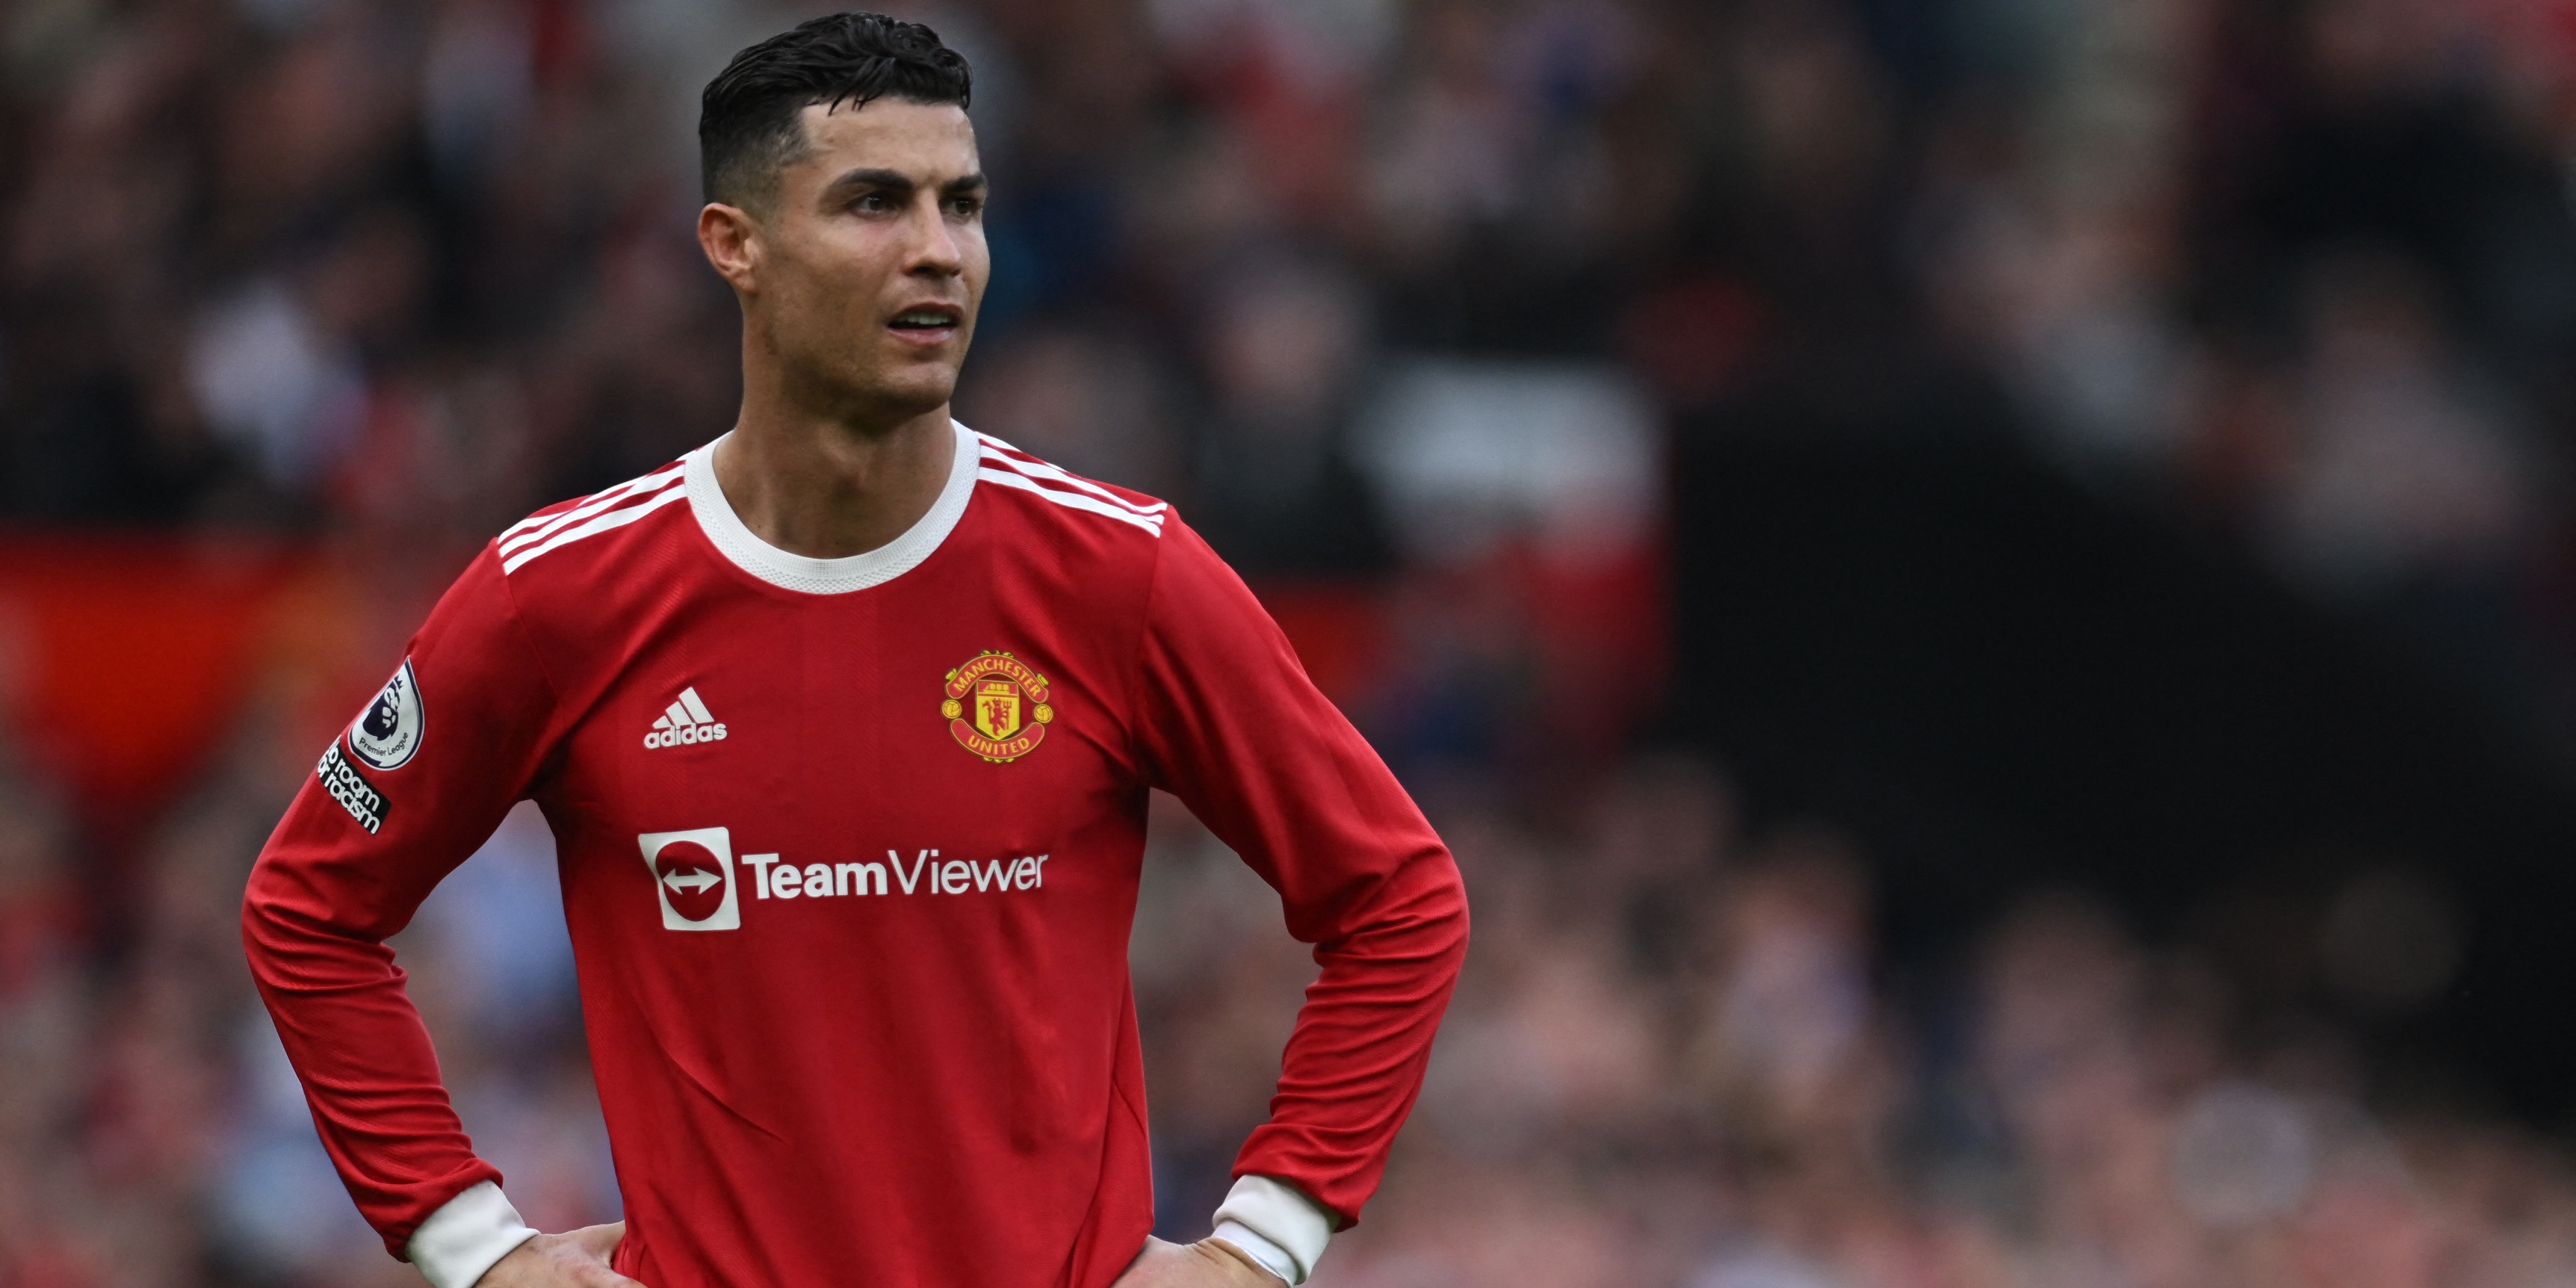 Cristiano Ronaldo to be absent for Liverpool clash after tragic passing of baby son